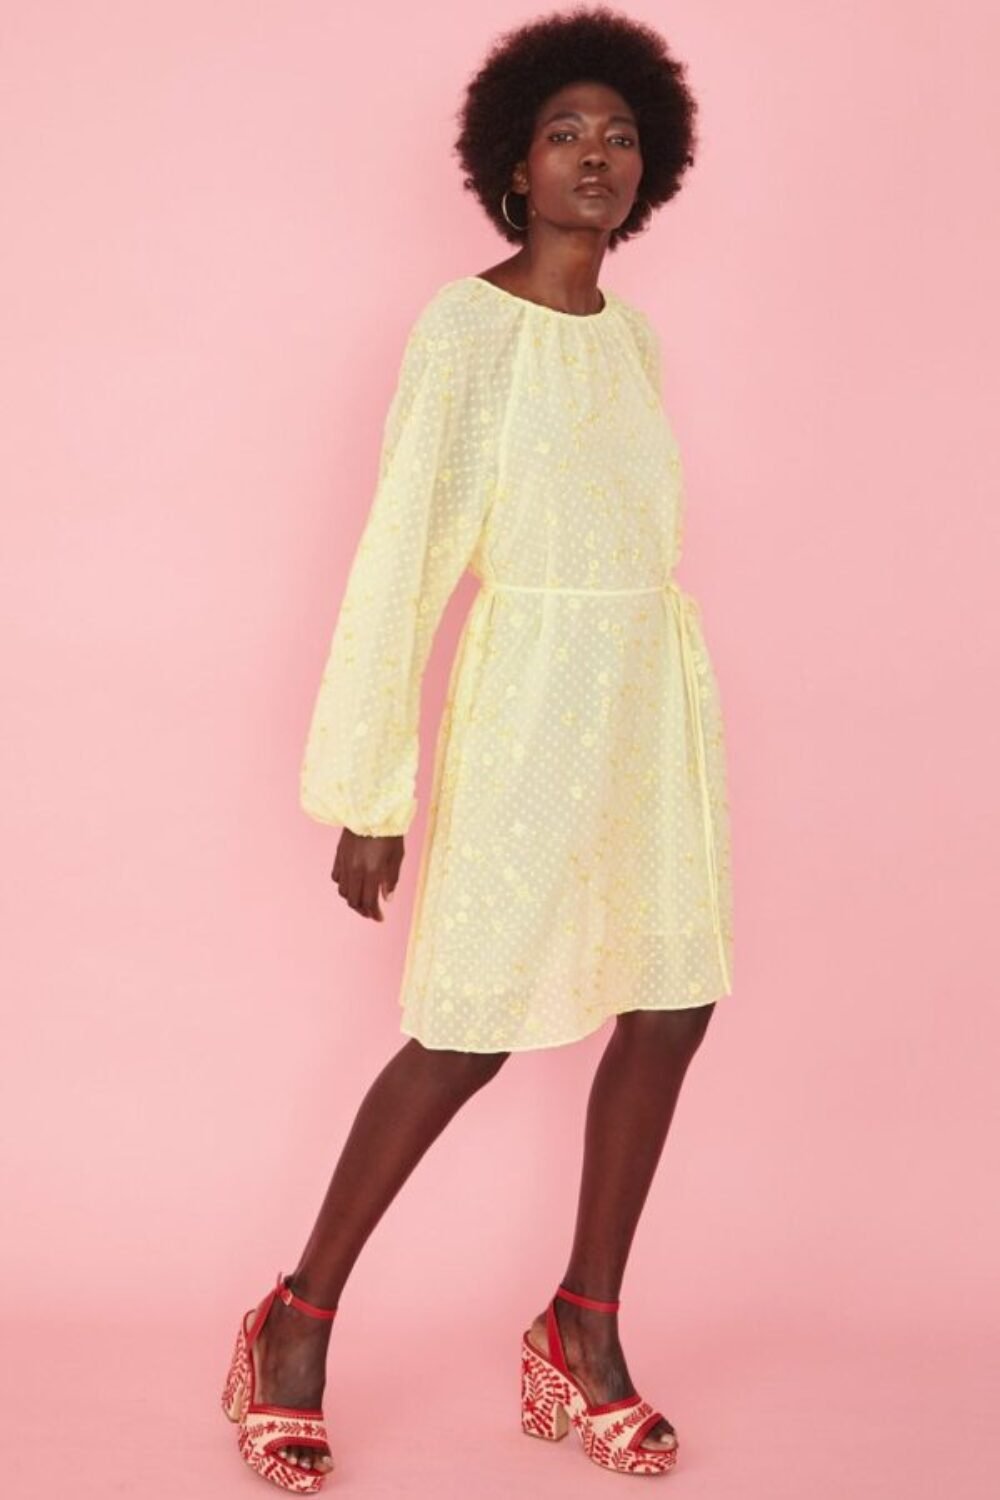 Shop Lux Silk Blend Buttercup Dress and women's luxury and designer clothes at www.lux-apparel.co.uk